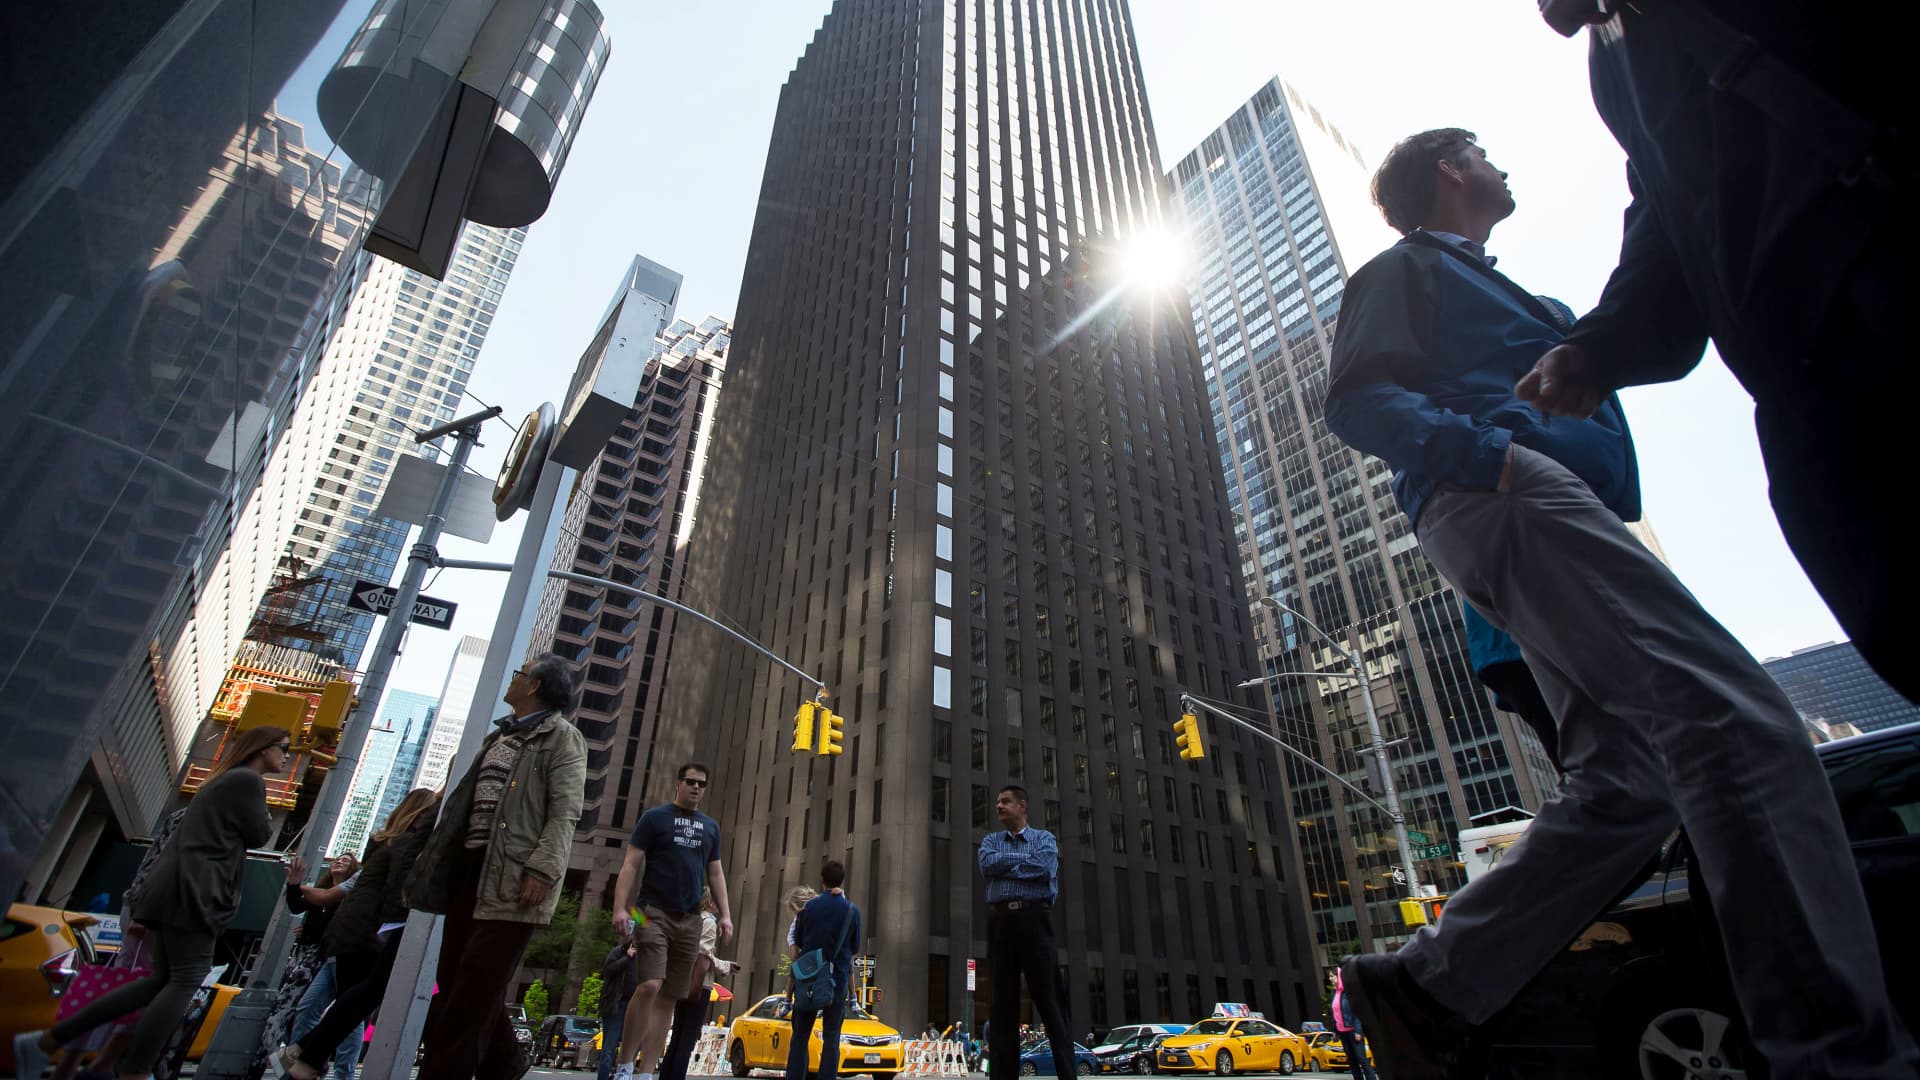 REITs that look resilient in recession, analysts say